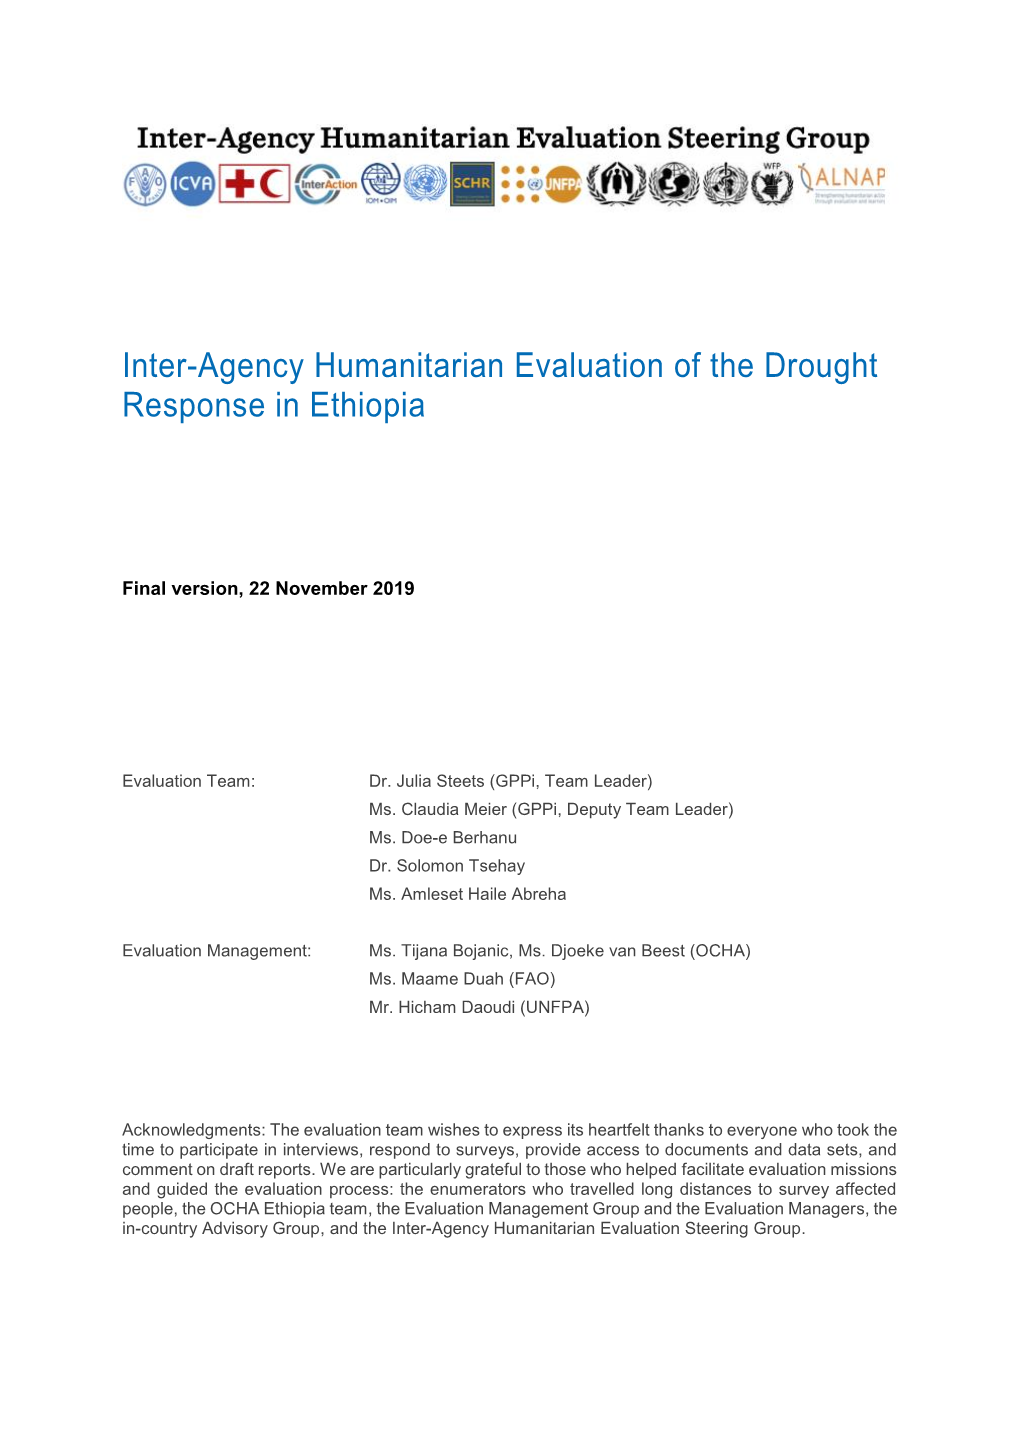 Inter-Agency Humanitarian Evaluation of the Drought Response in Ethiopia